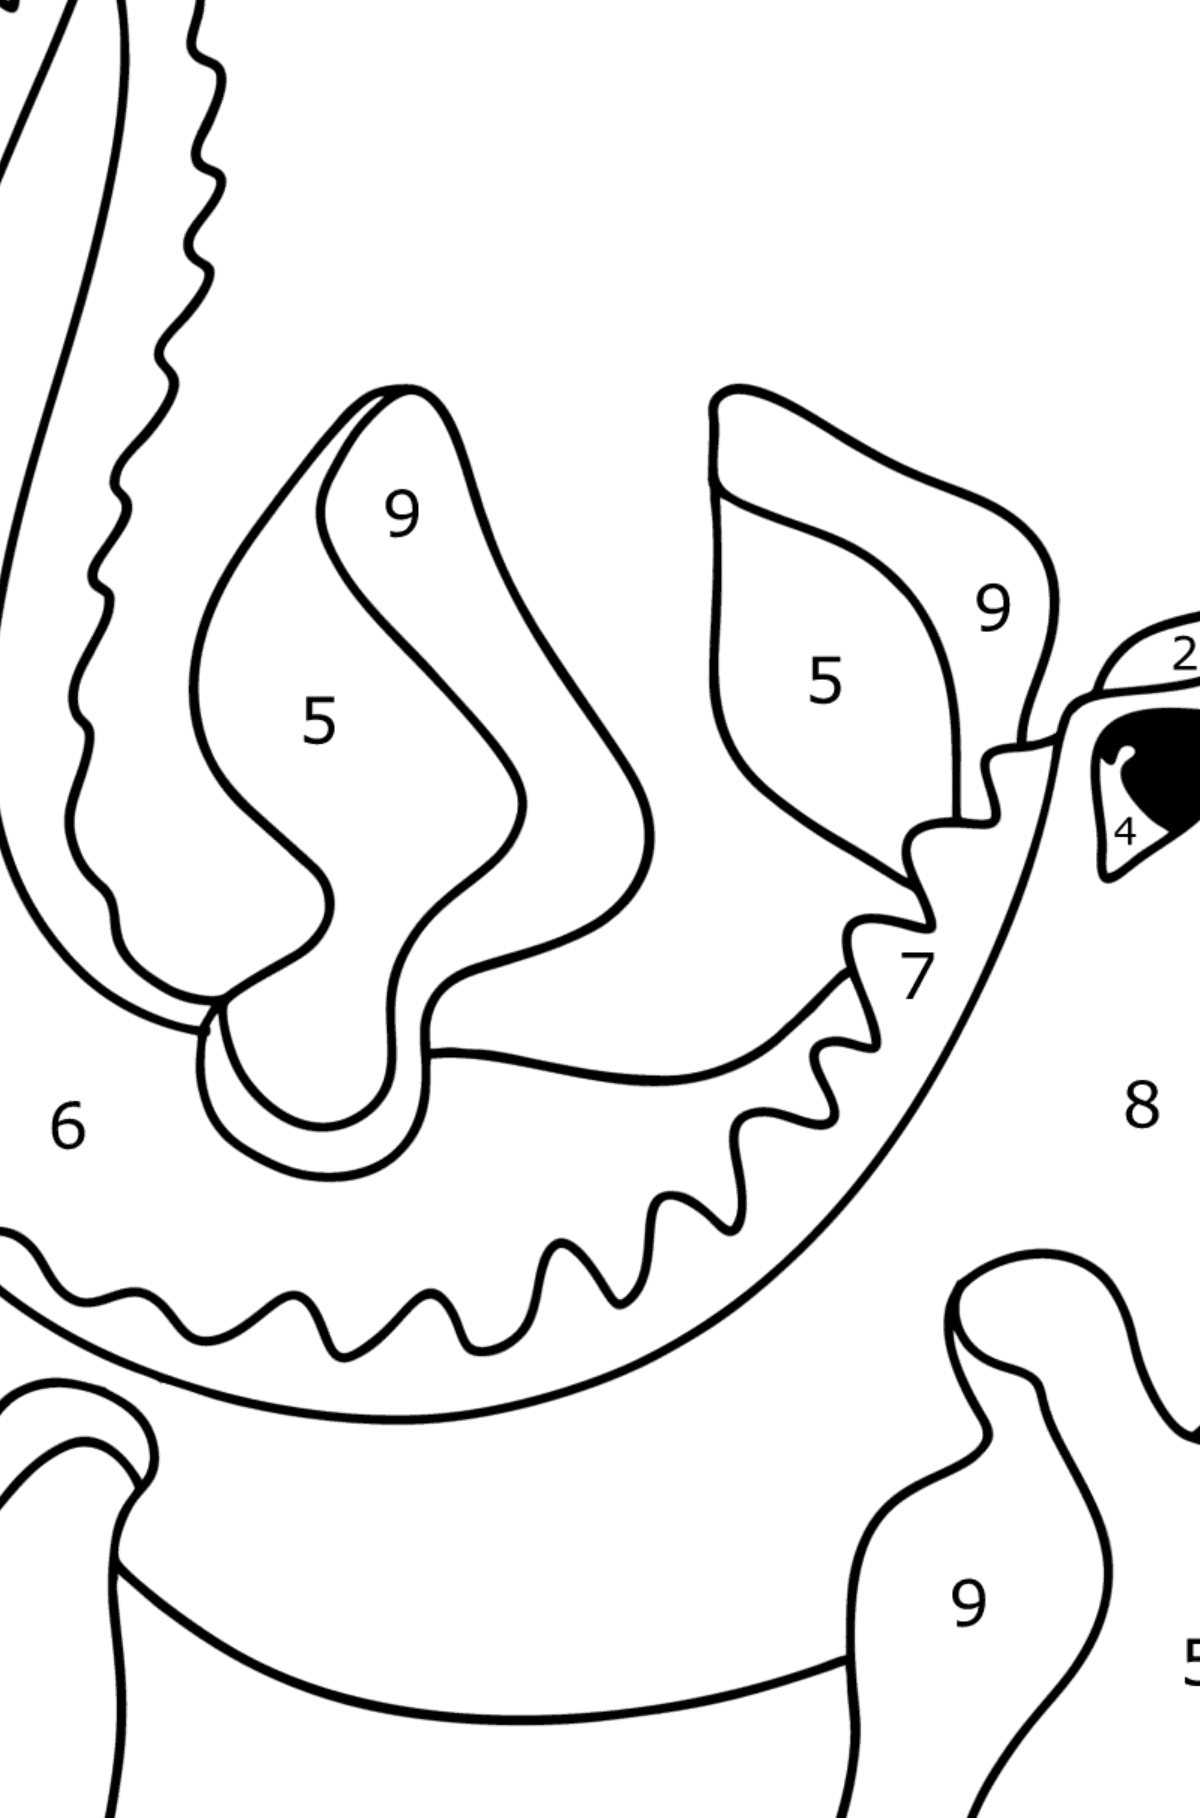 Mosasaurus coloring page - Coloring by Numbers for Kids